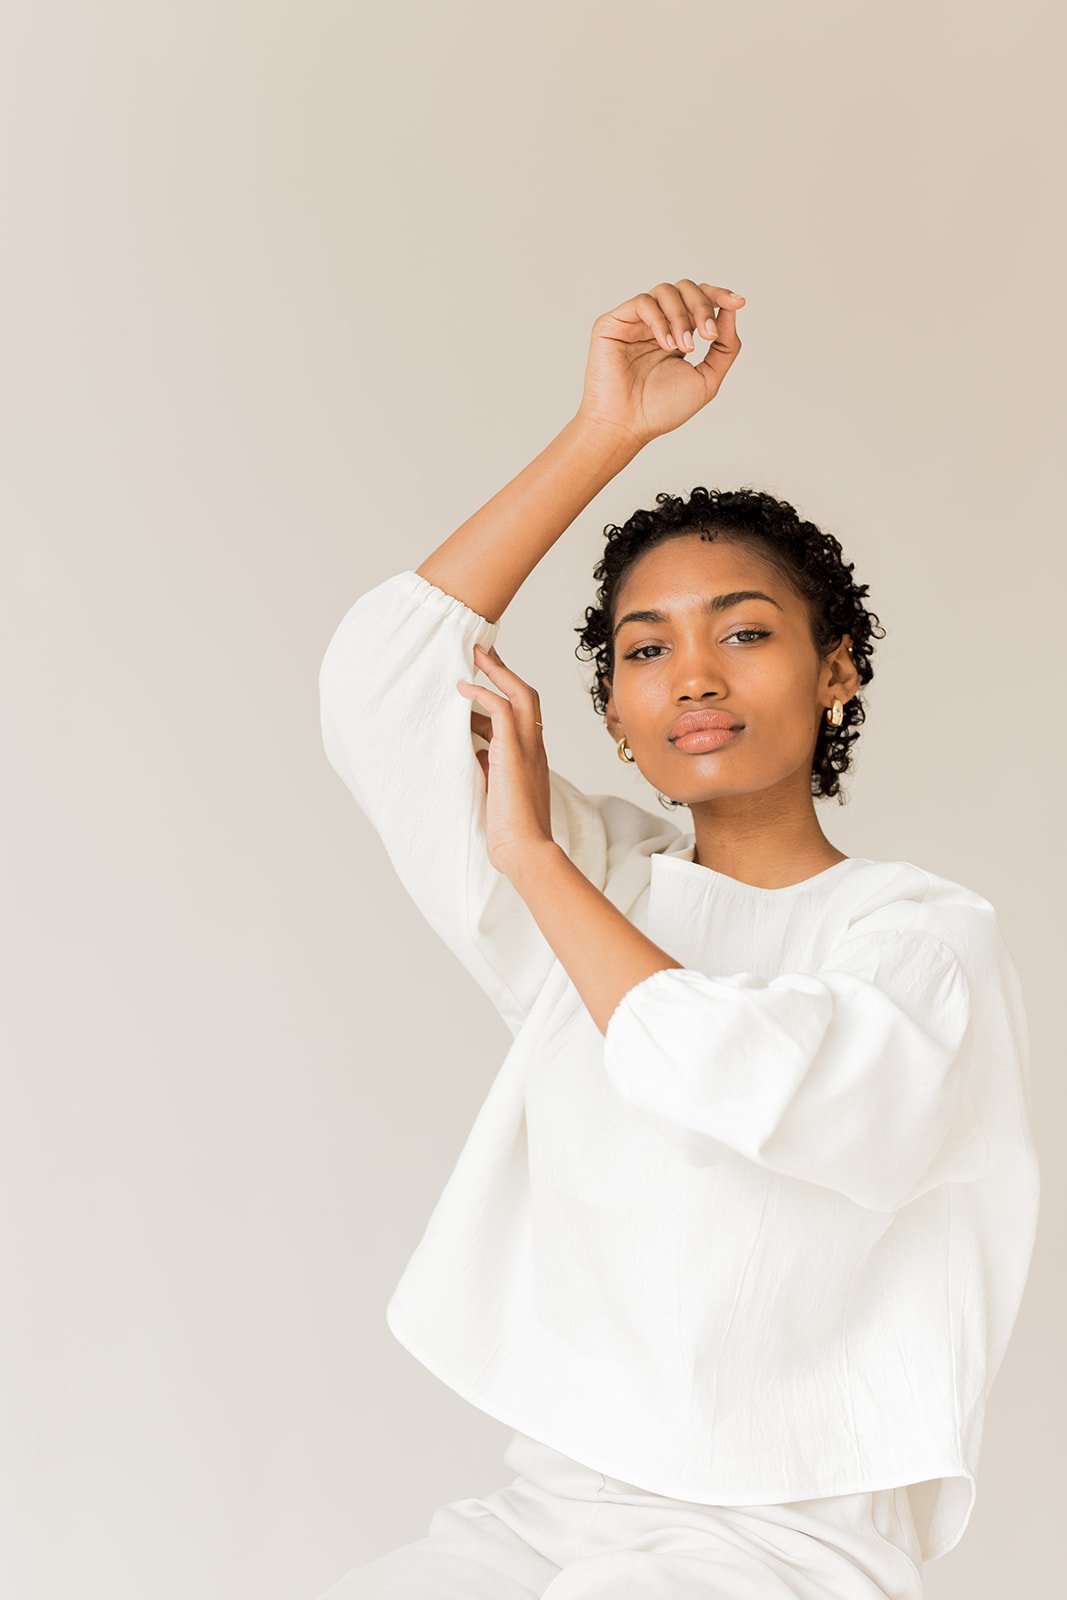 Dressing Gaily: 5 Ethical Brands Redefining Fashion With Feminine